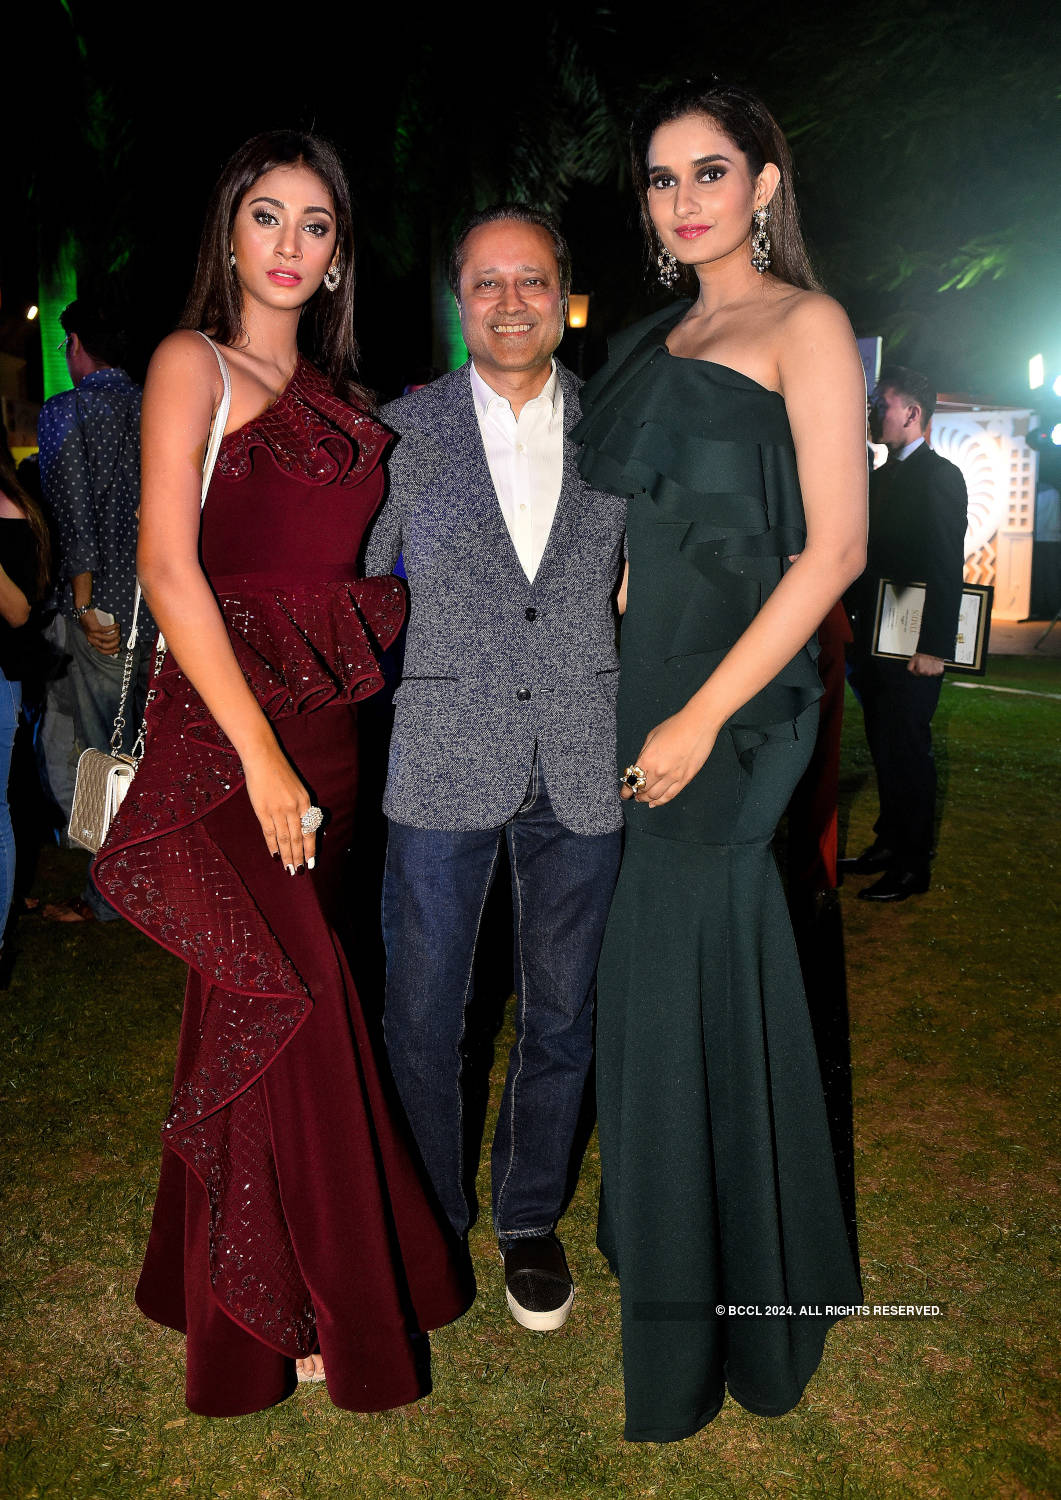 Times Food and Nightlife Awards '19 - Mumbai: Candid pictures